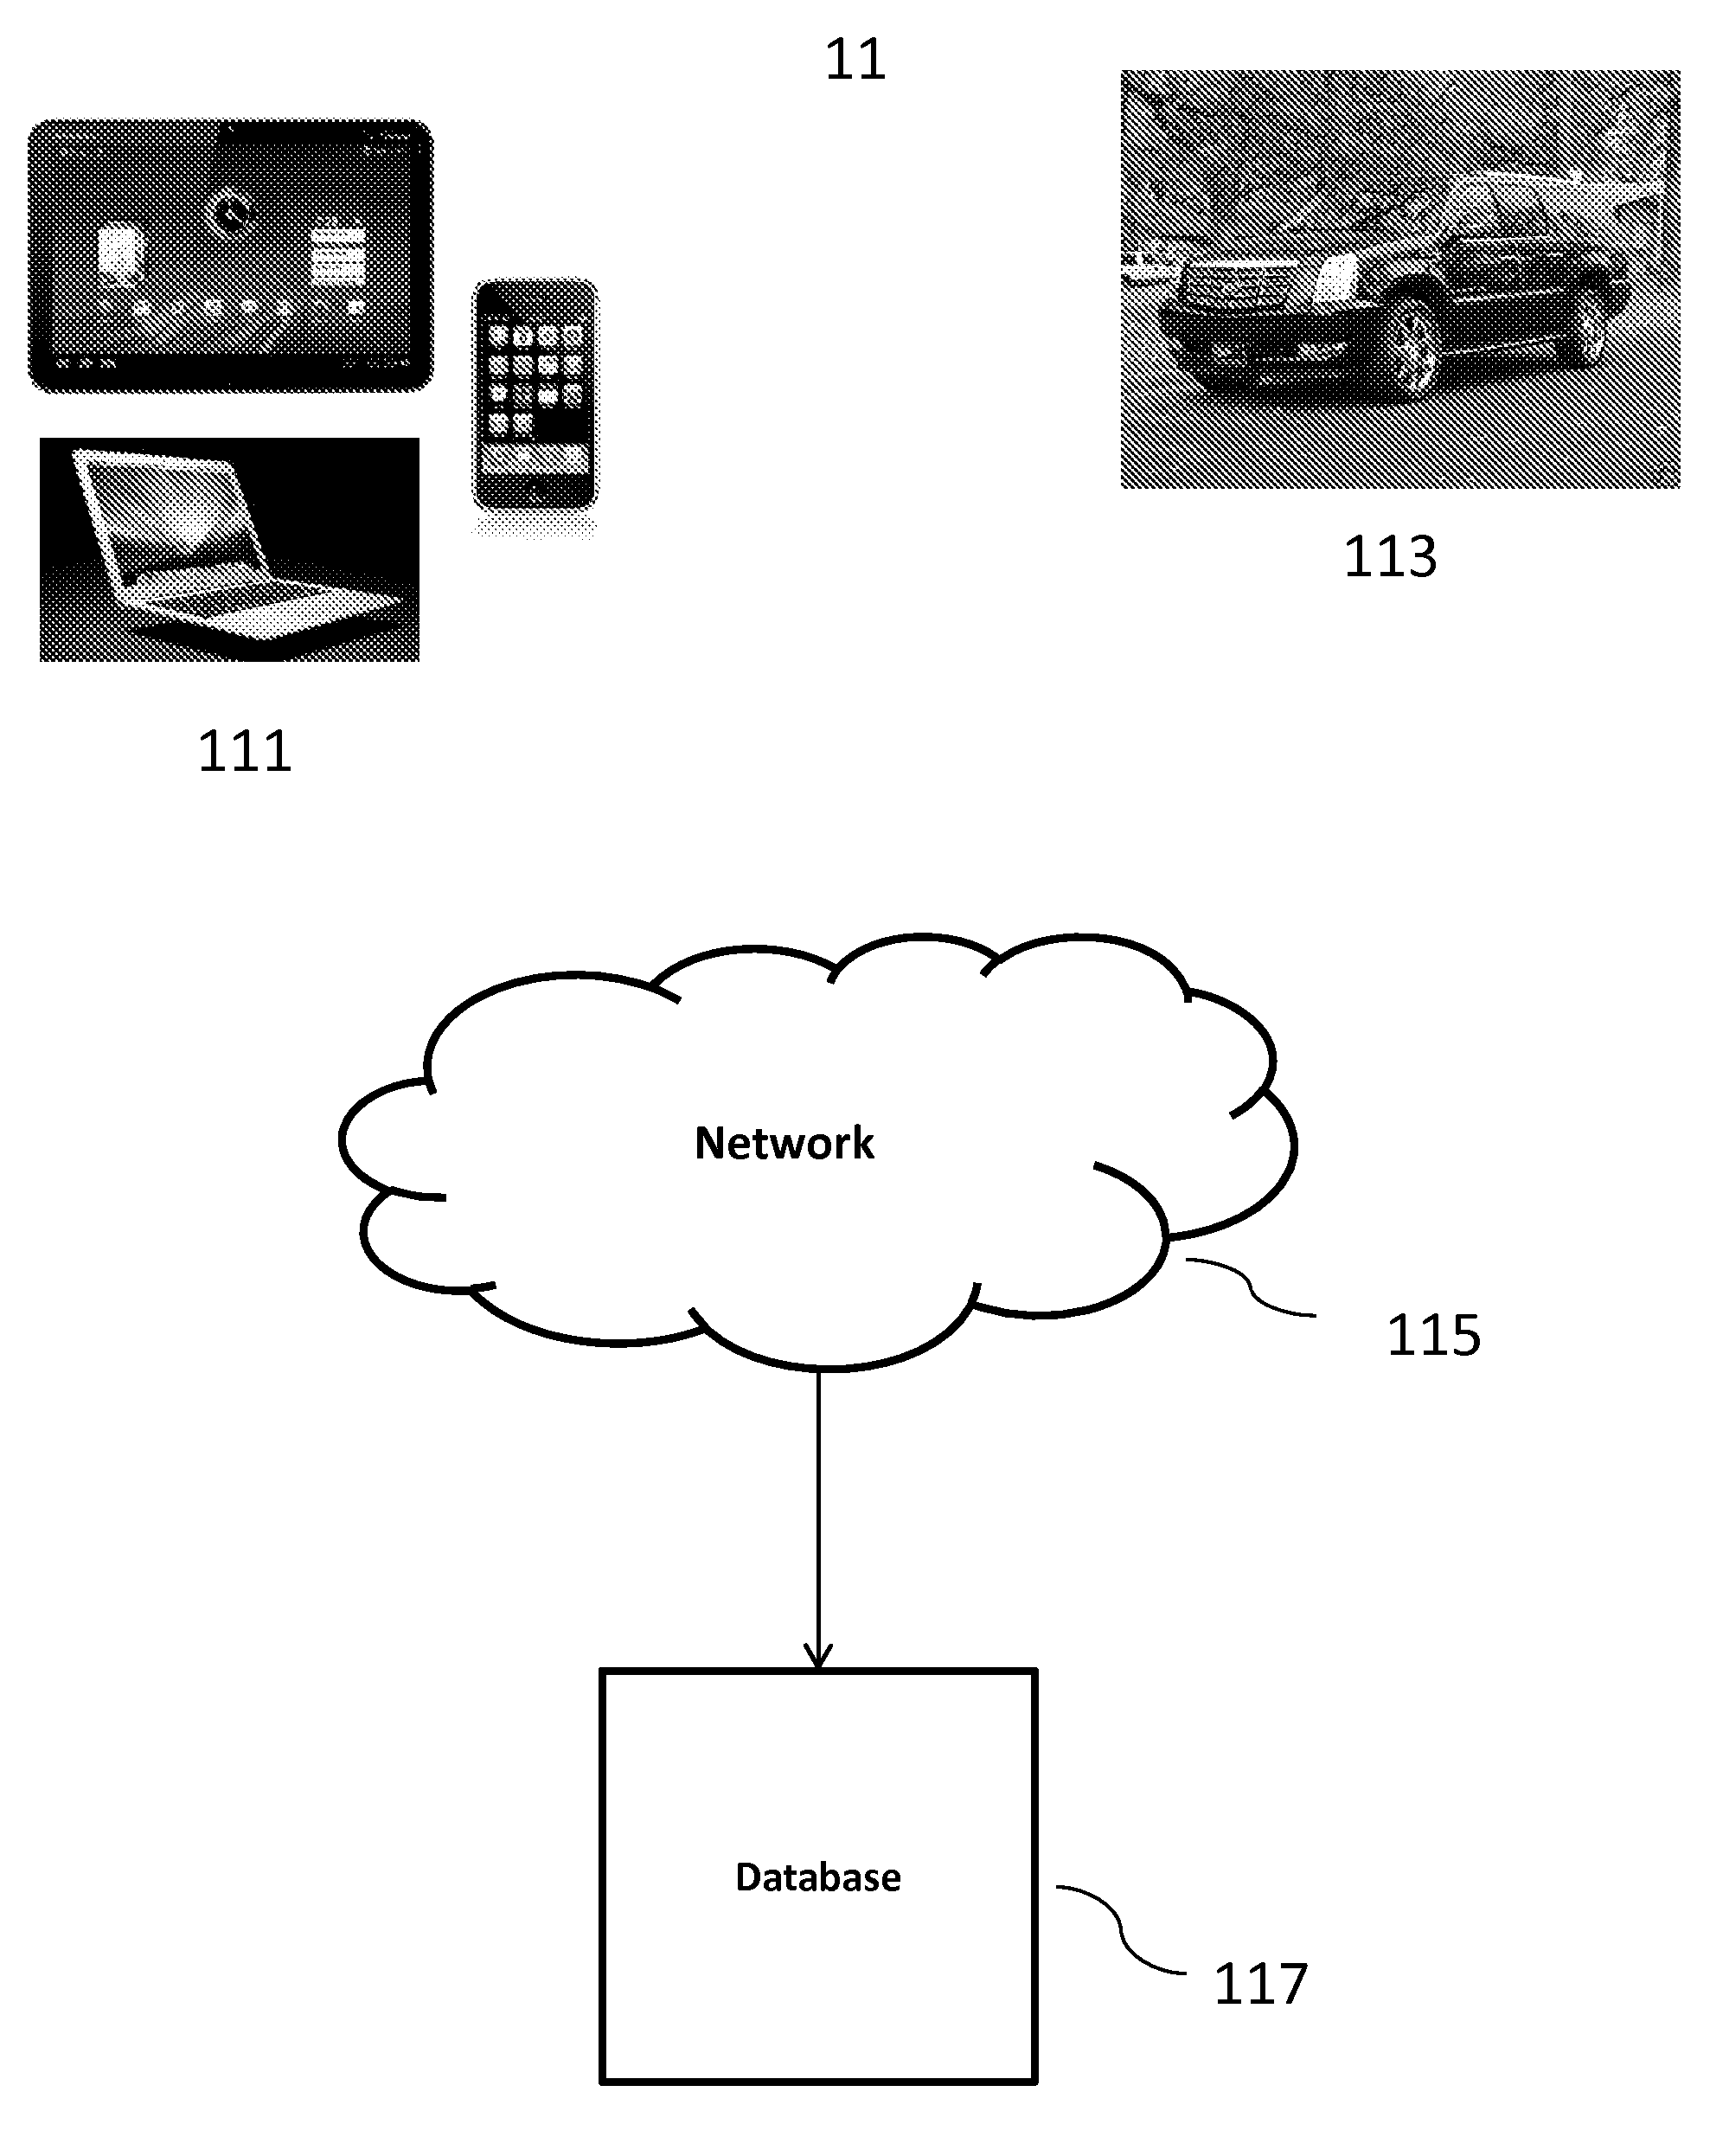 Method and System for Recording and Transferring Motor Vehicle Information